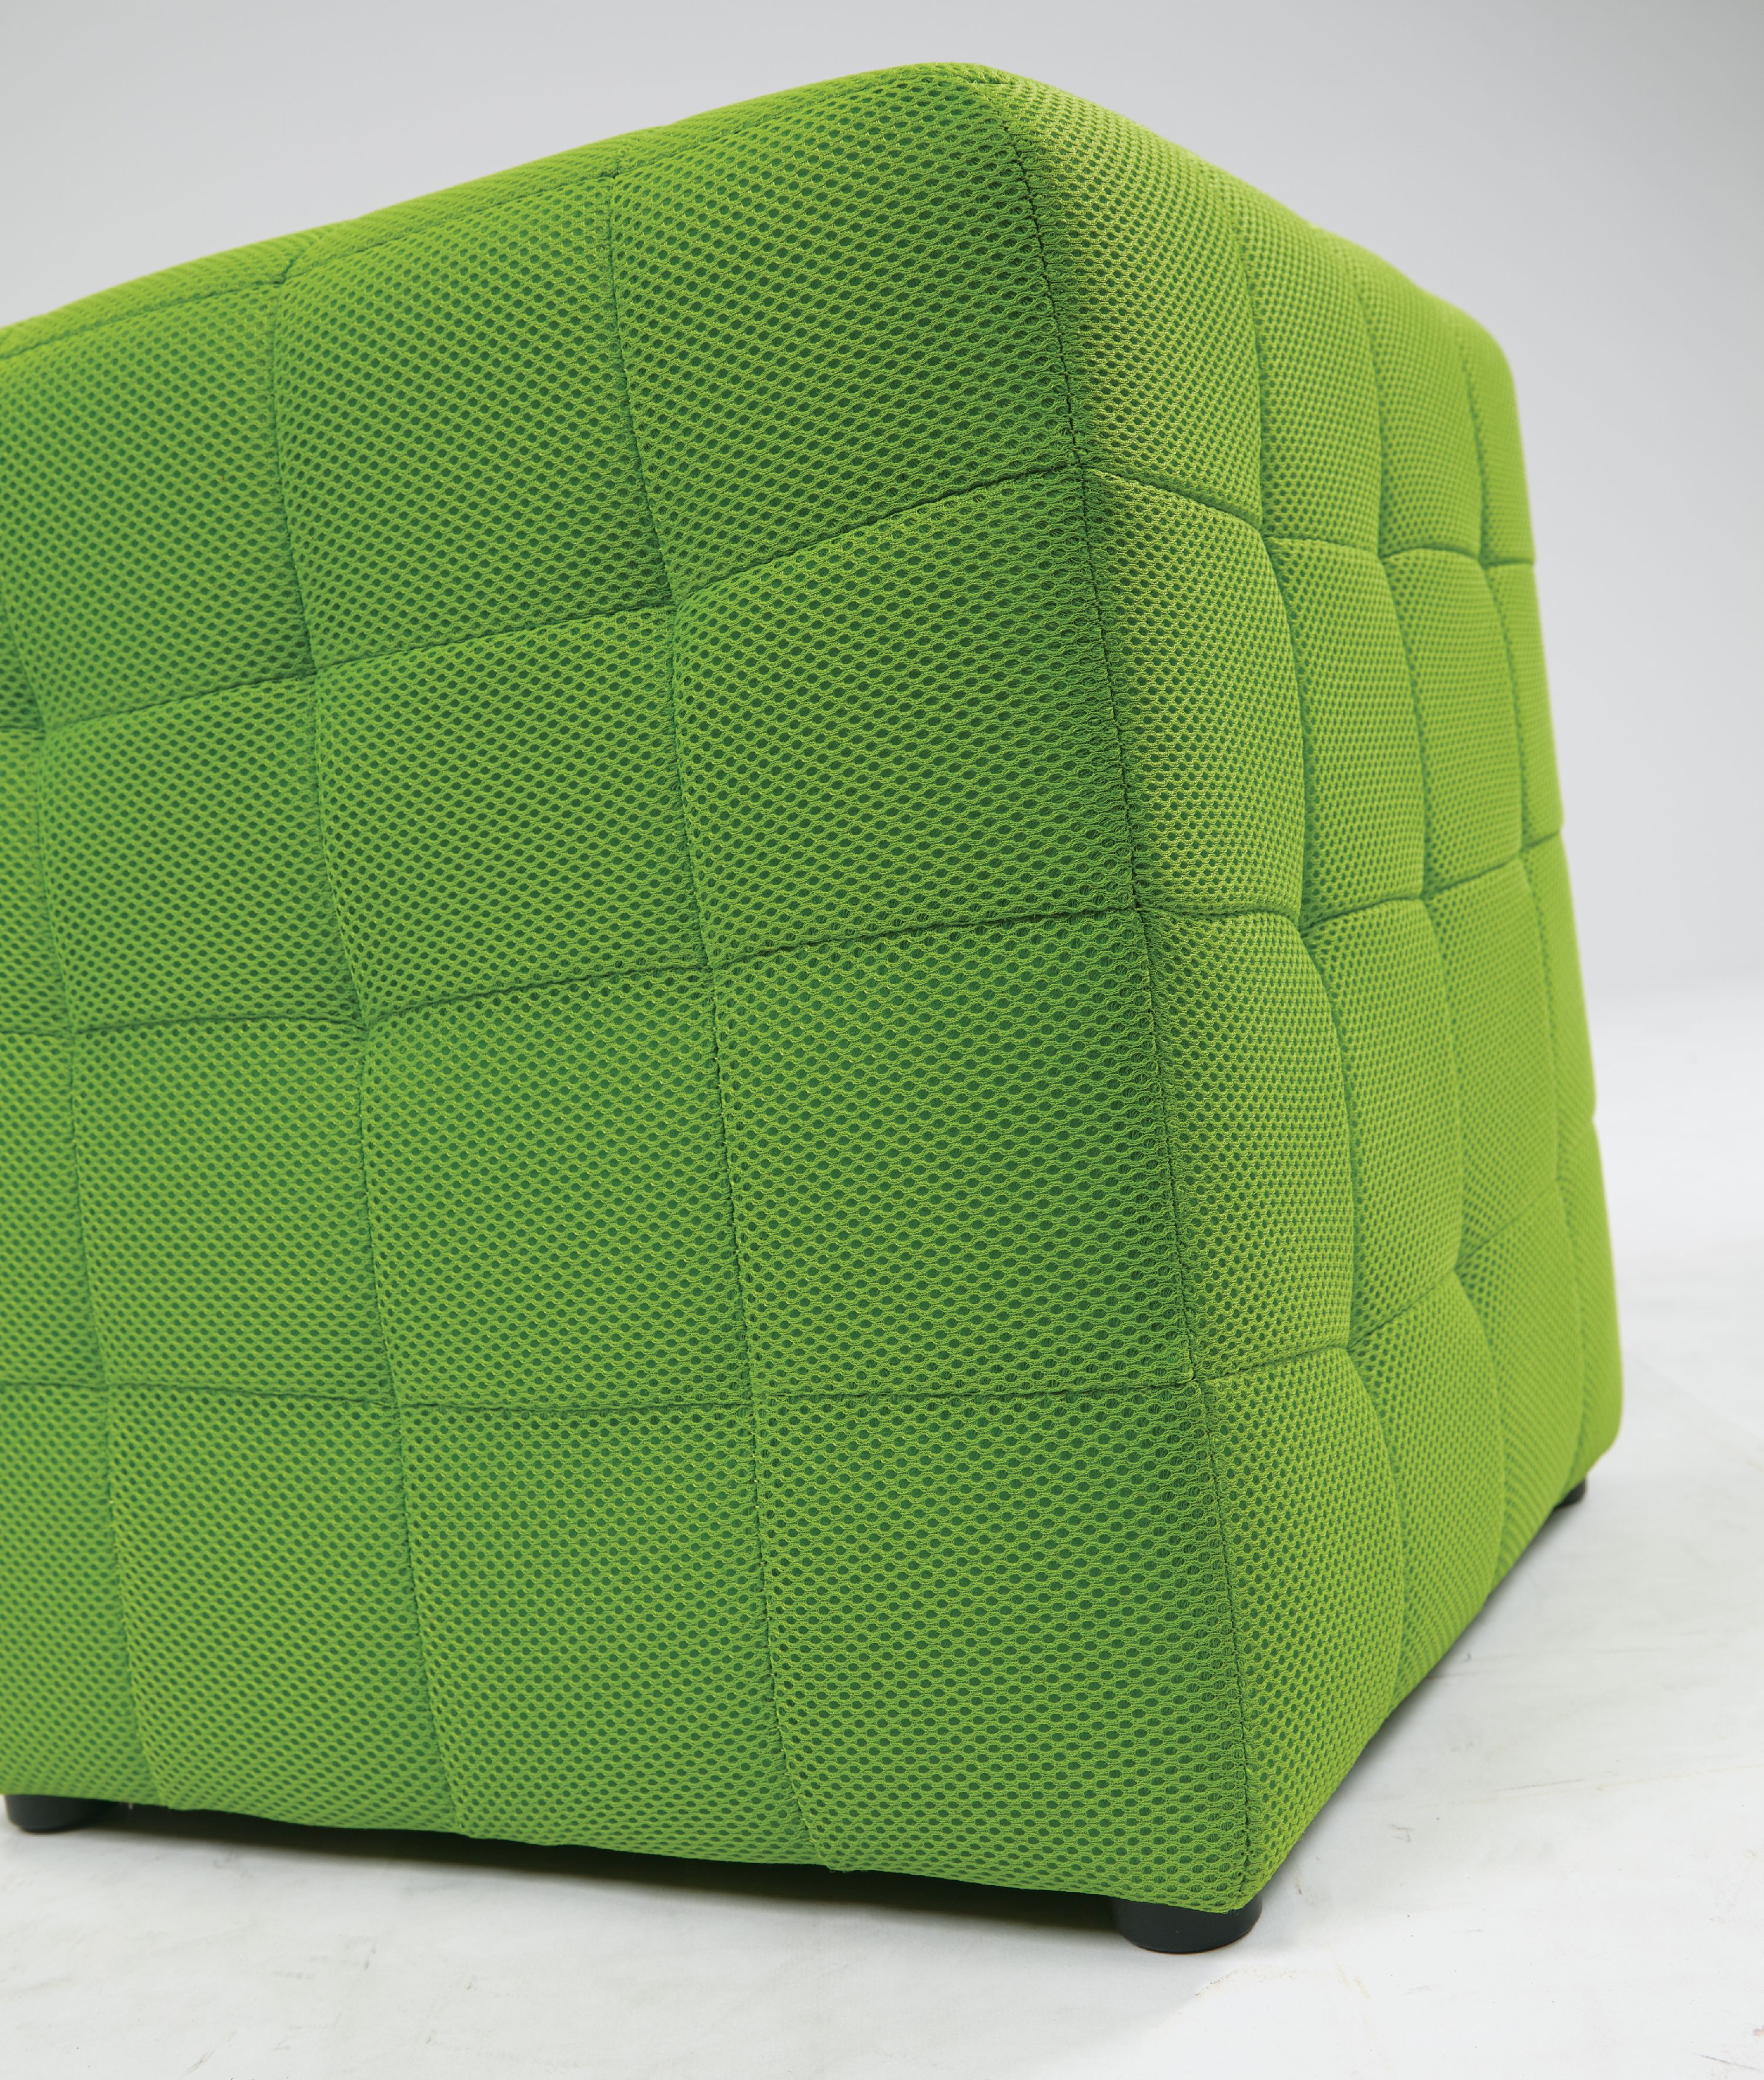 OSP Home Furnishings Detour 15" Green Fabric Cube - image 5 of 10